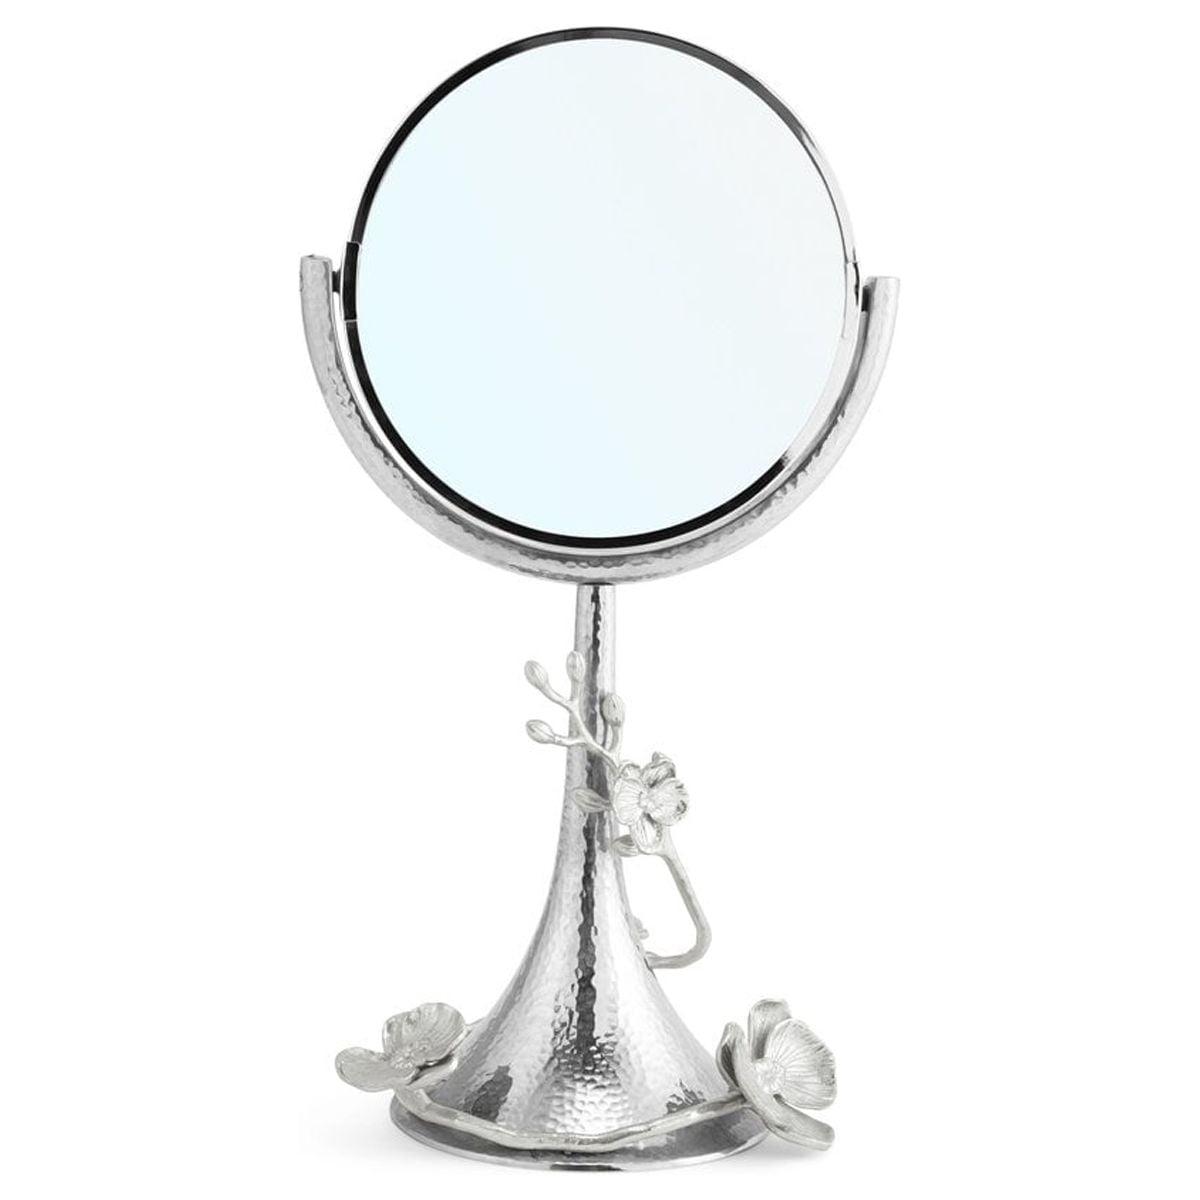 Ethereal White Orchid 17'' Silver Nickel Vanity Mirror